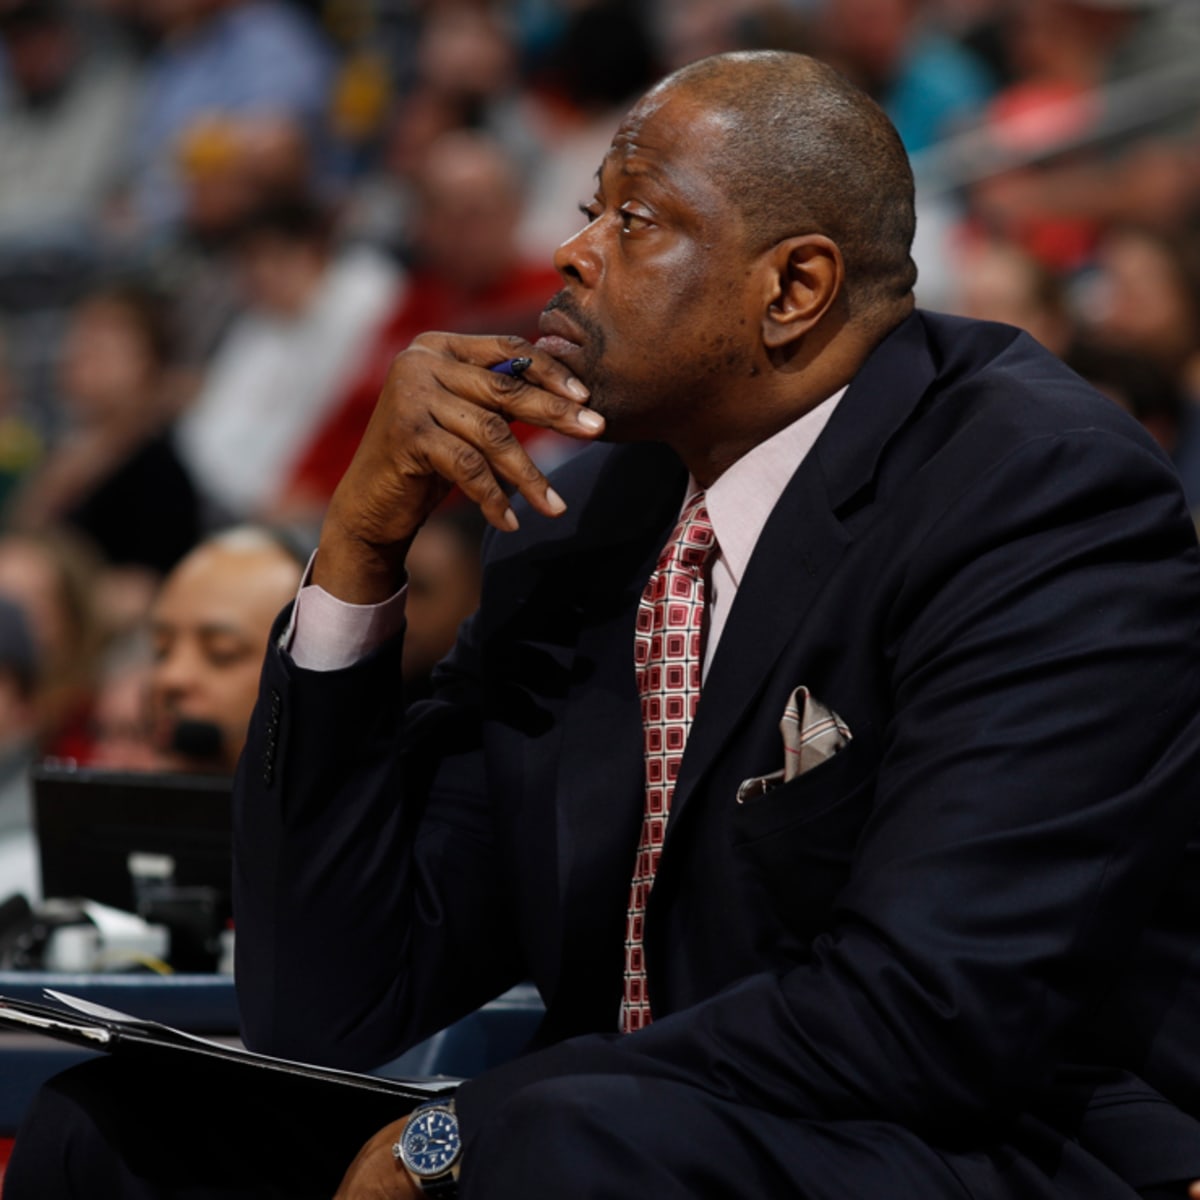 Georgetown Hires Patrick Ewing as Men's Basketball Coach - The New